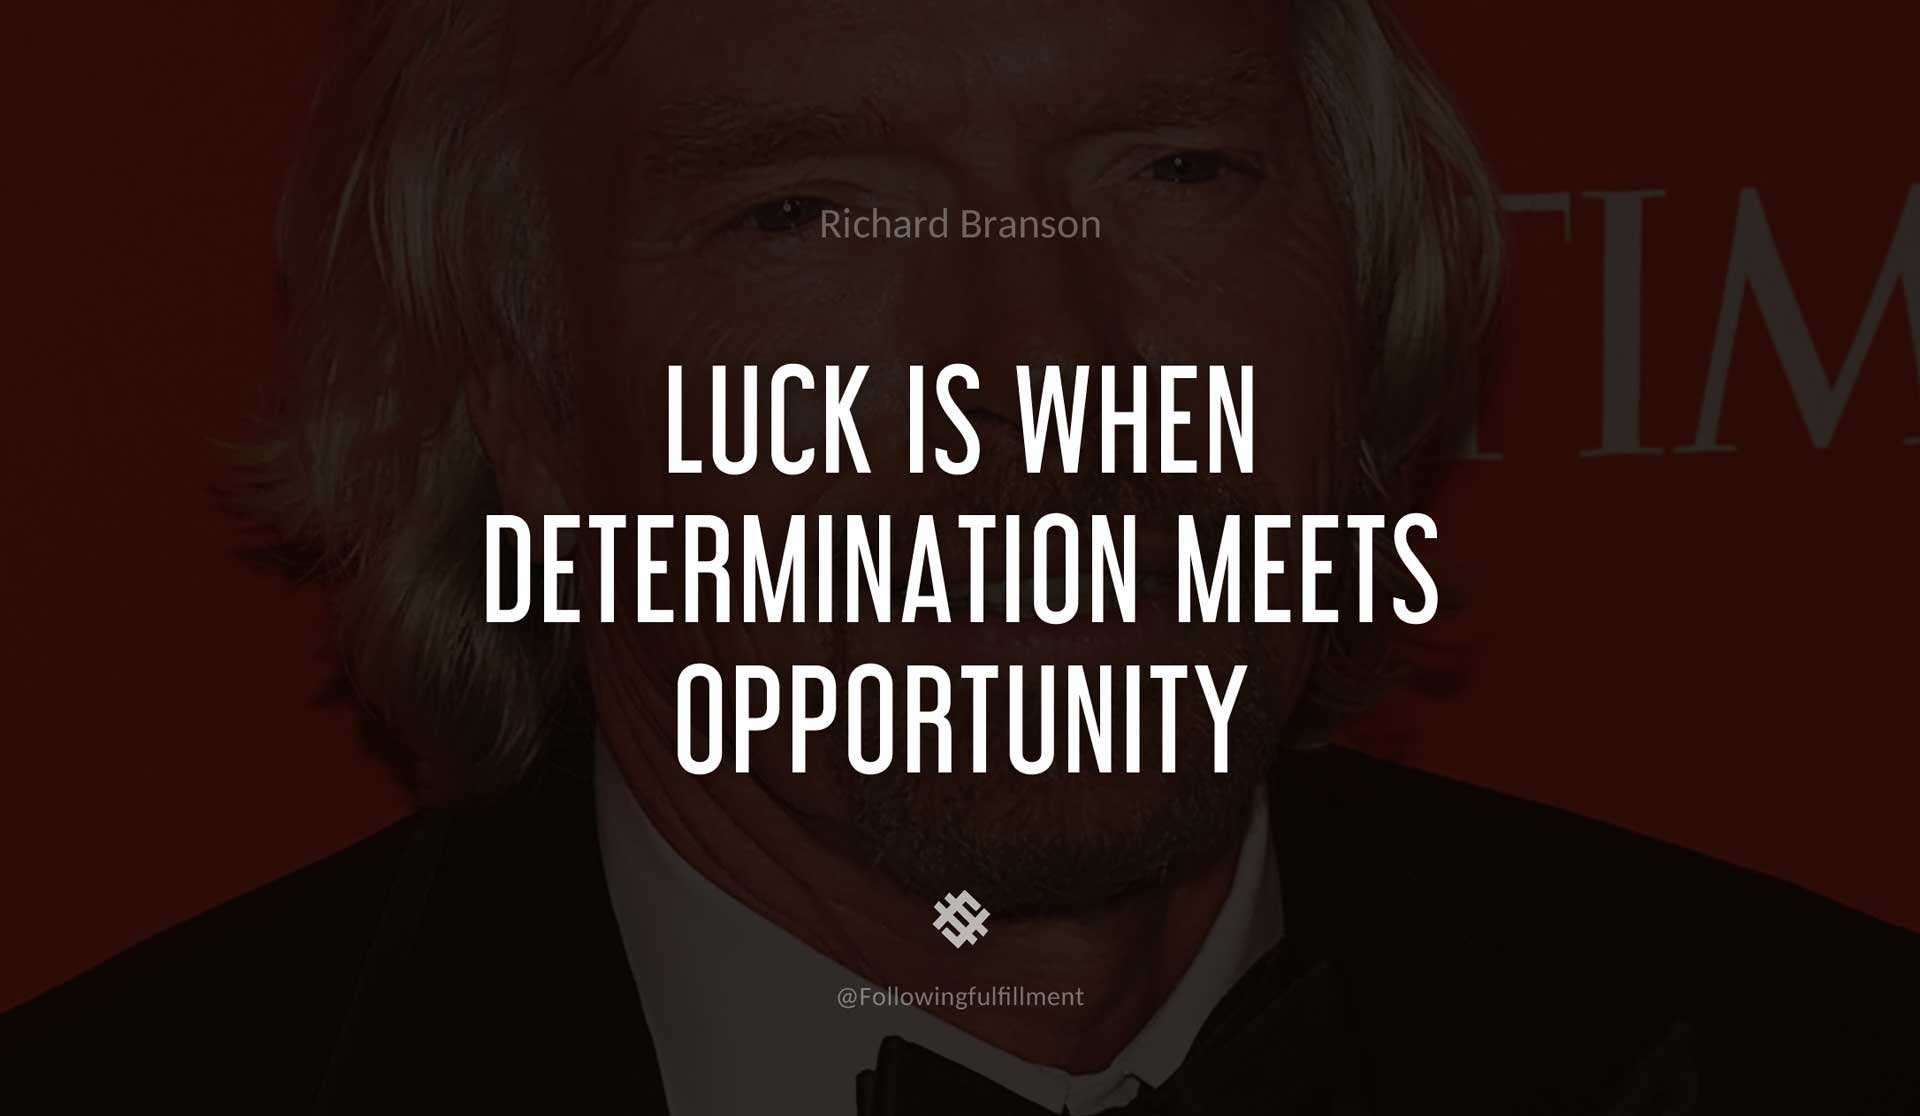 Luck-is-when-determination-meets-opportunity-RICHARD-BRANSON-Quote.jpg